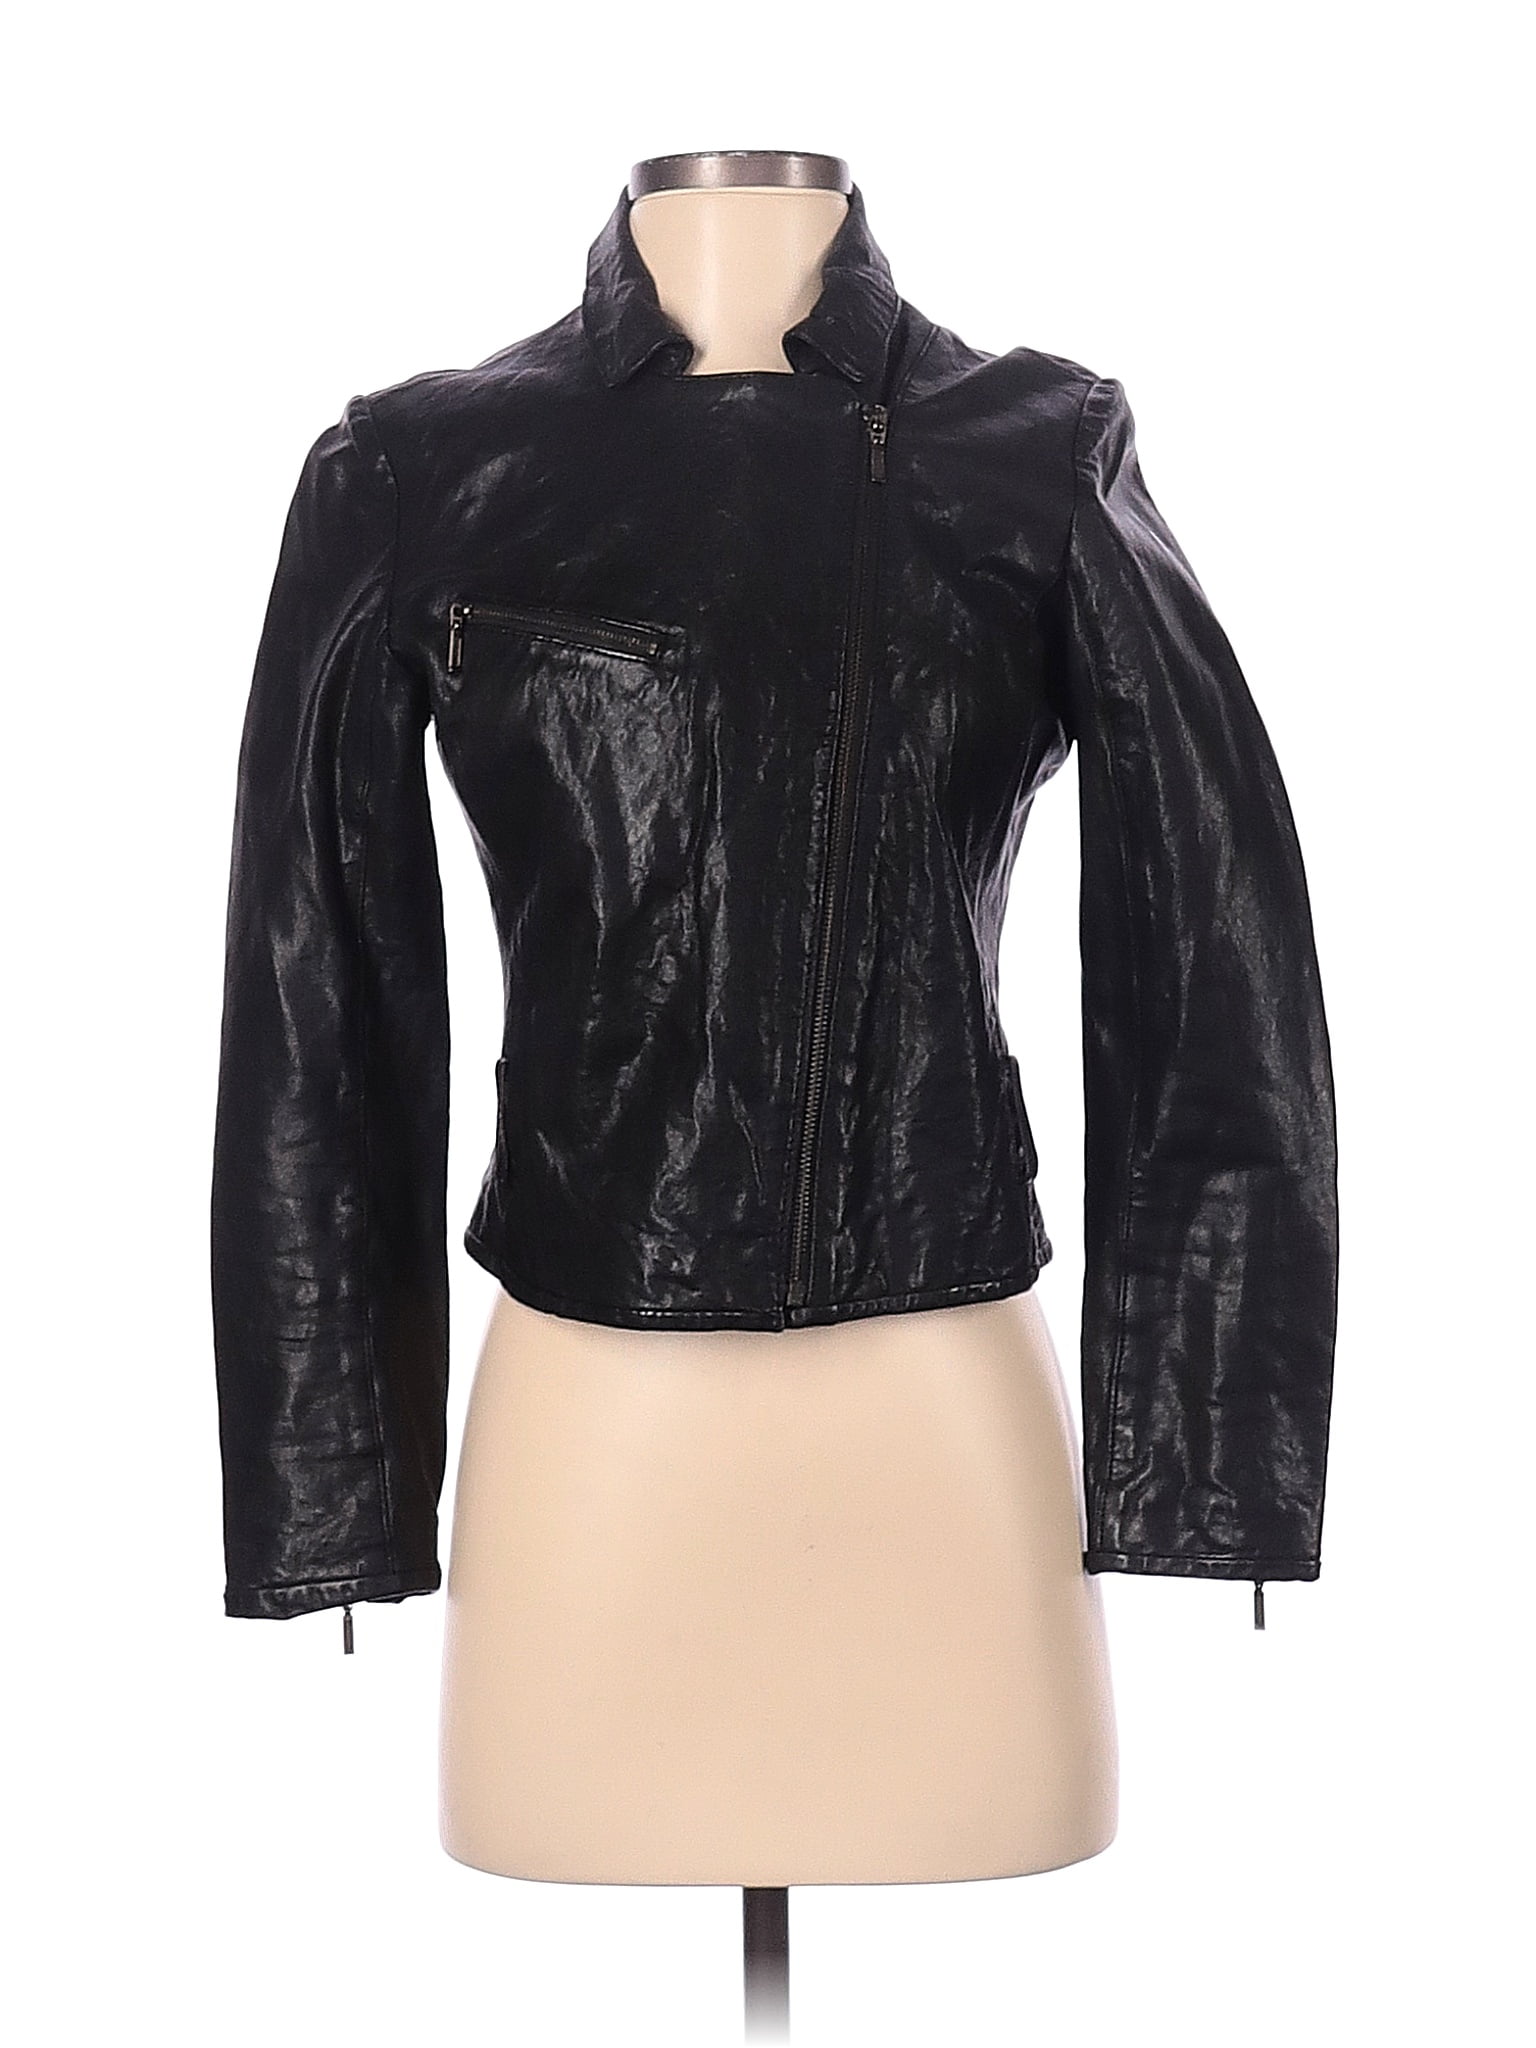 Fossil 100% Leather Solid Black Leather Jacket Size XS - 70% off | thredUP